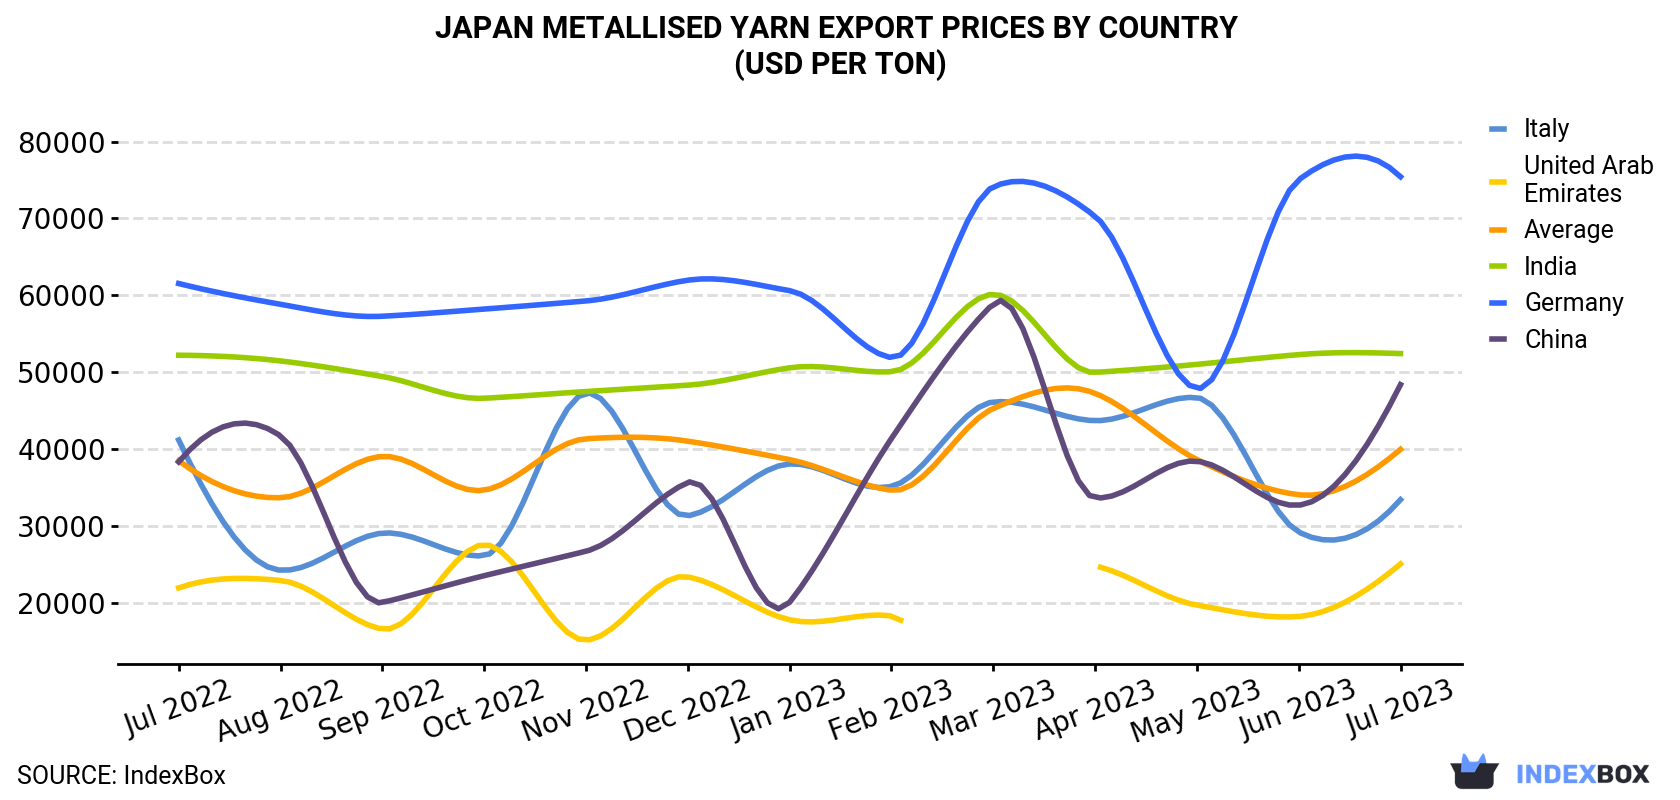 Japan Metallised Yarn Export Prices By Country (USD Per Ton)